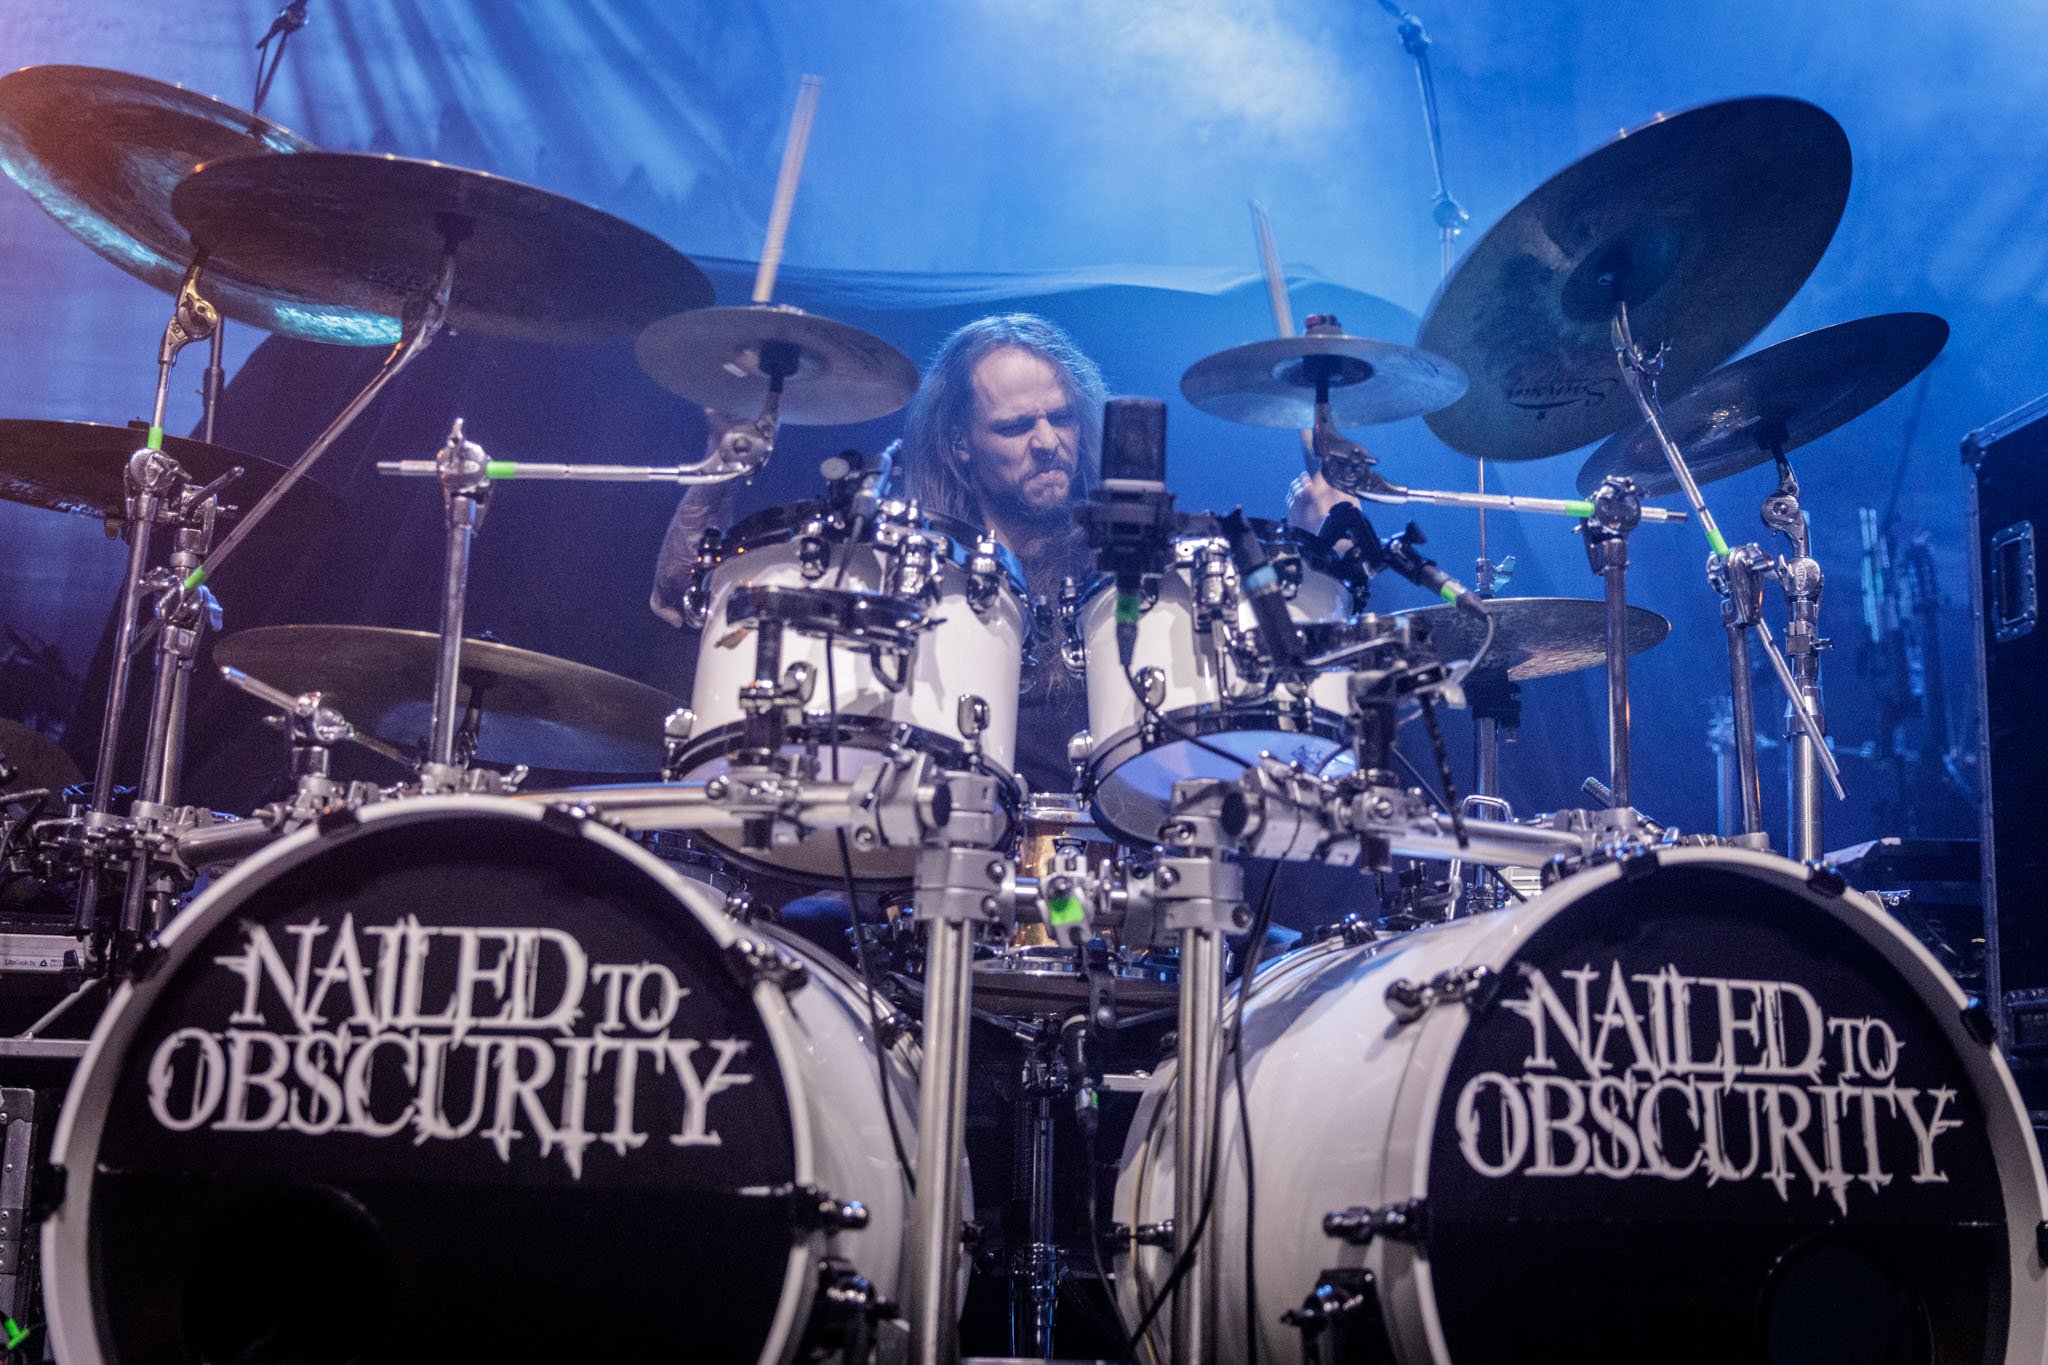 Nailed To Obscurity at the O2 Ritz in Manchester on November 24t